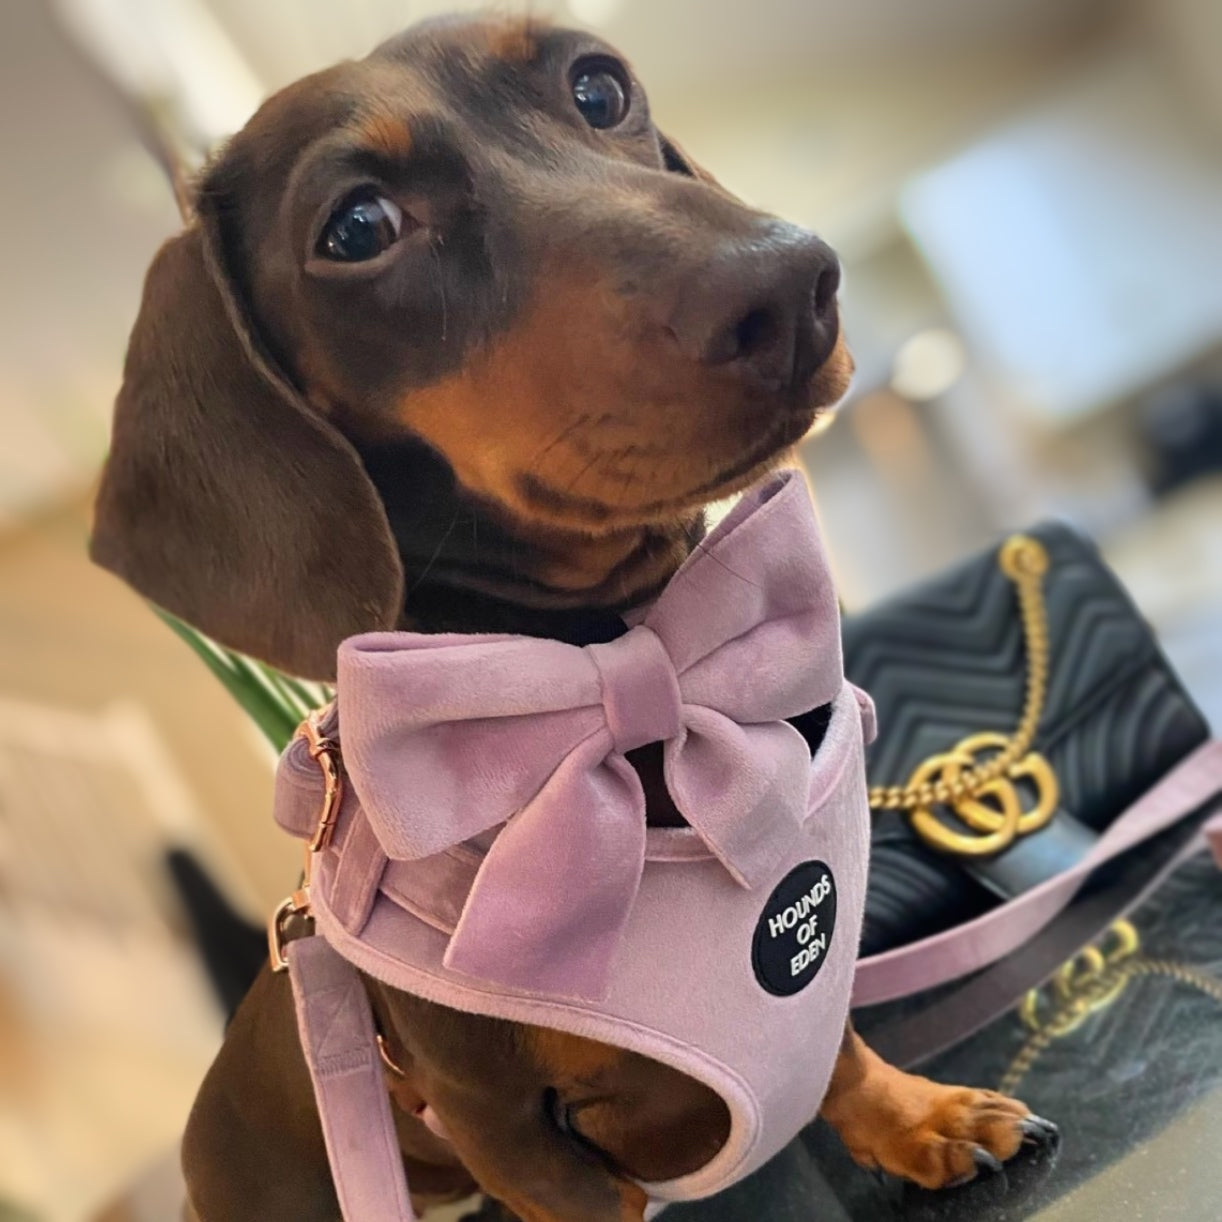 Lilac Dreams - Lilac Velvet Dog Harness with Rose Gold Metal Hardware